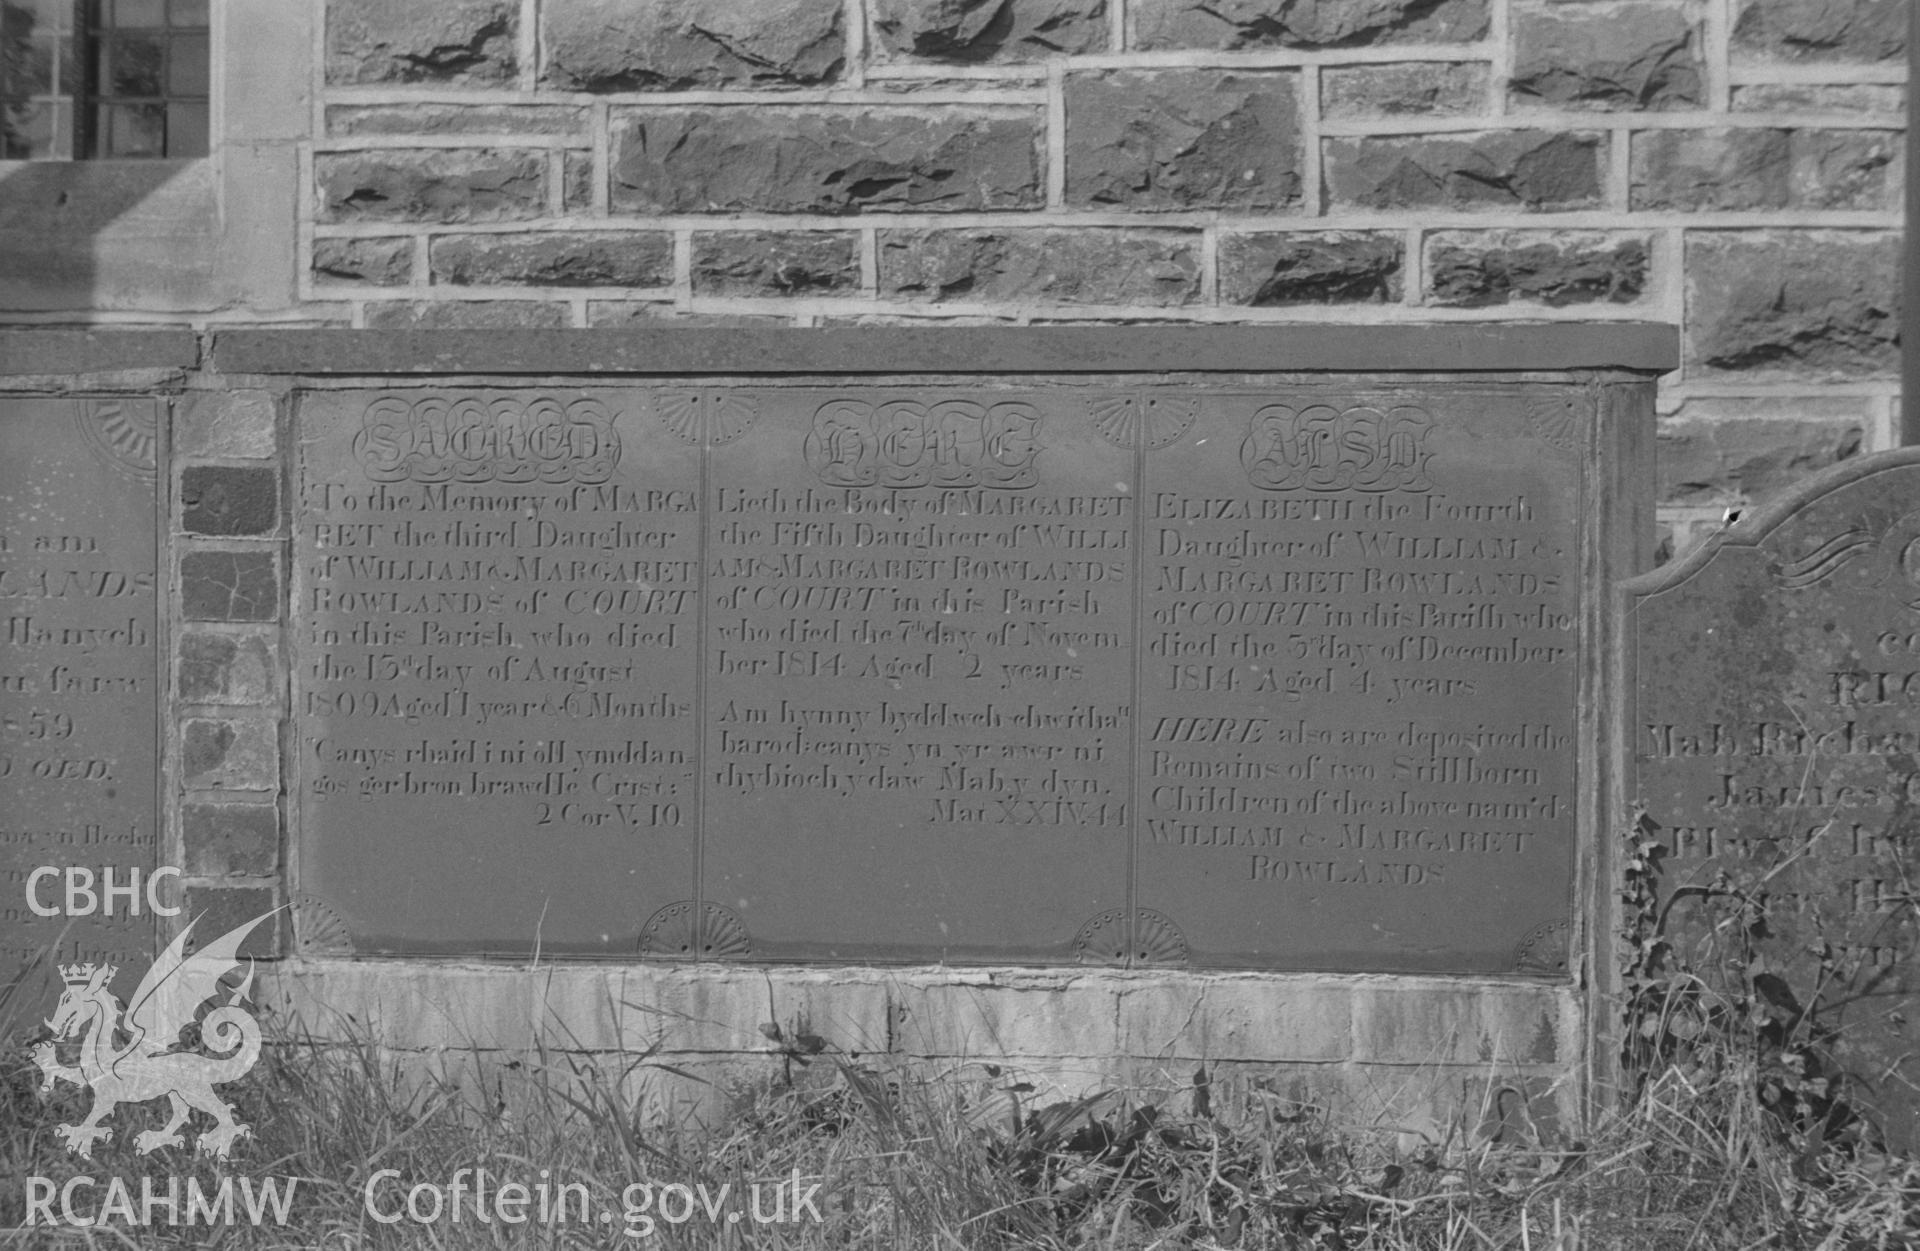 Digital copy of a black and white negative showing view of gravestone in memory of Margaret and William Roland's children who died in infancy, at St. Non's Church, Llanerchaeron. Photographed by Arthur O. Chater in September 1966.